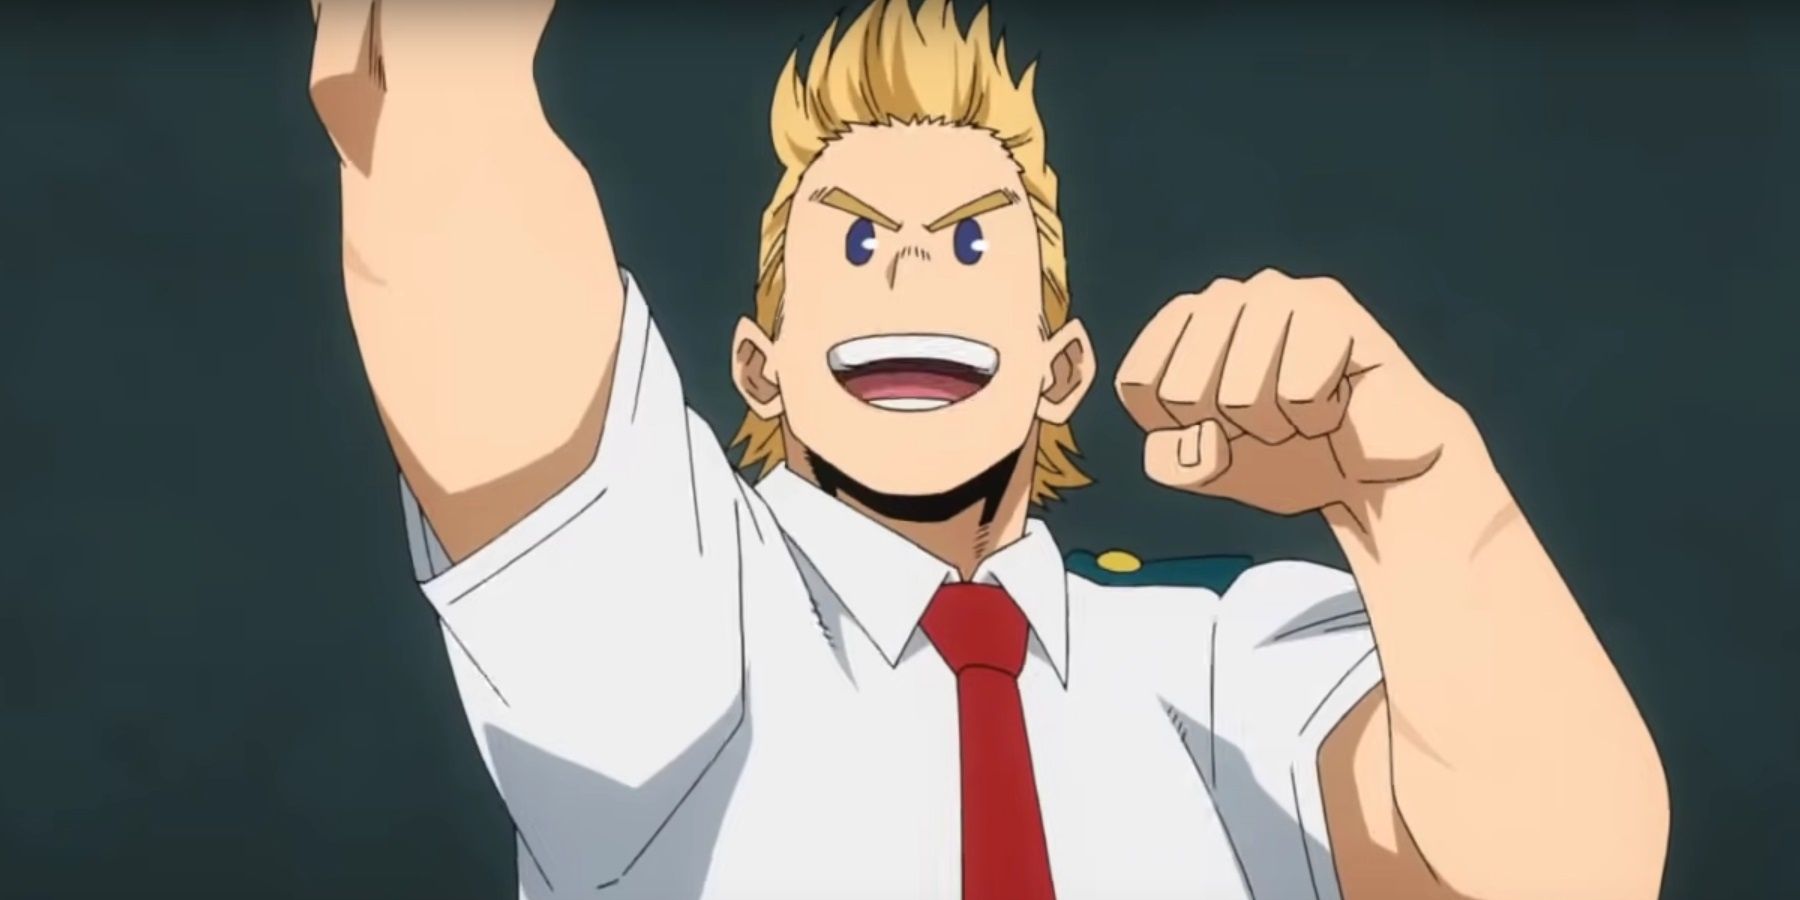 One of the rising stars of the My hero academia universe is Mirio Togata, a